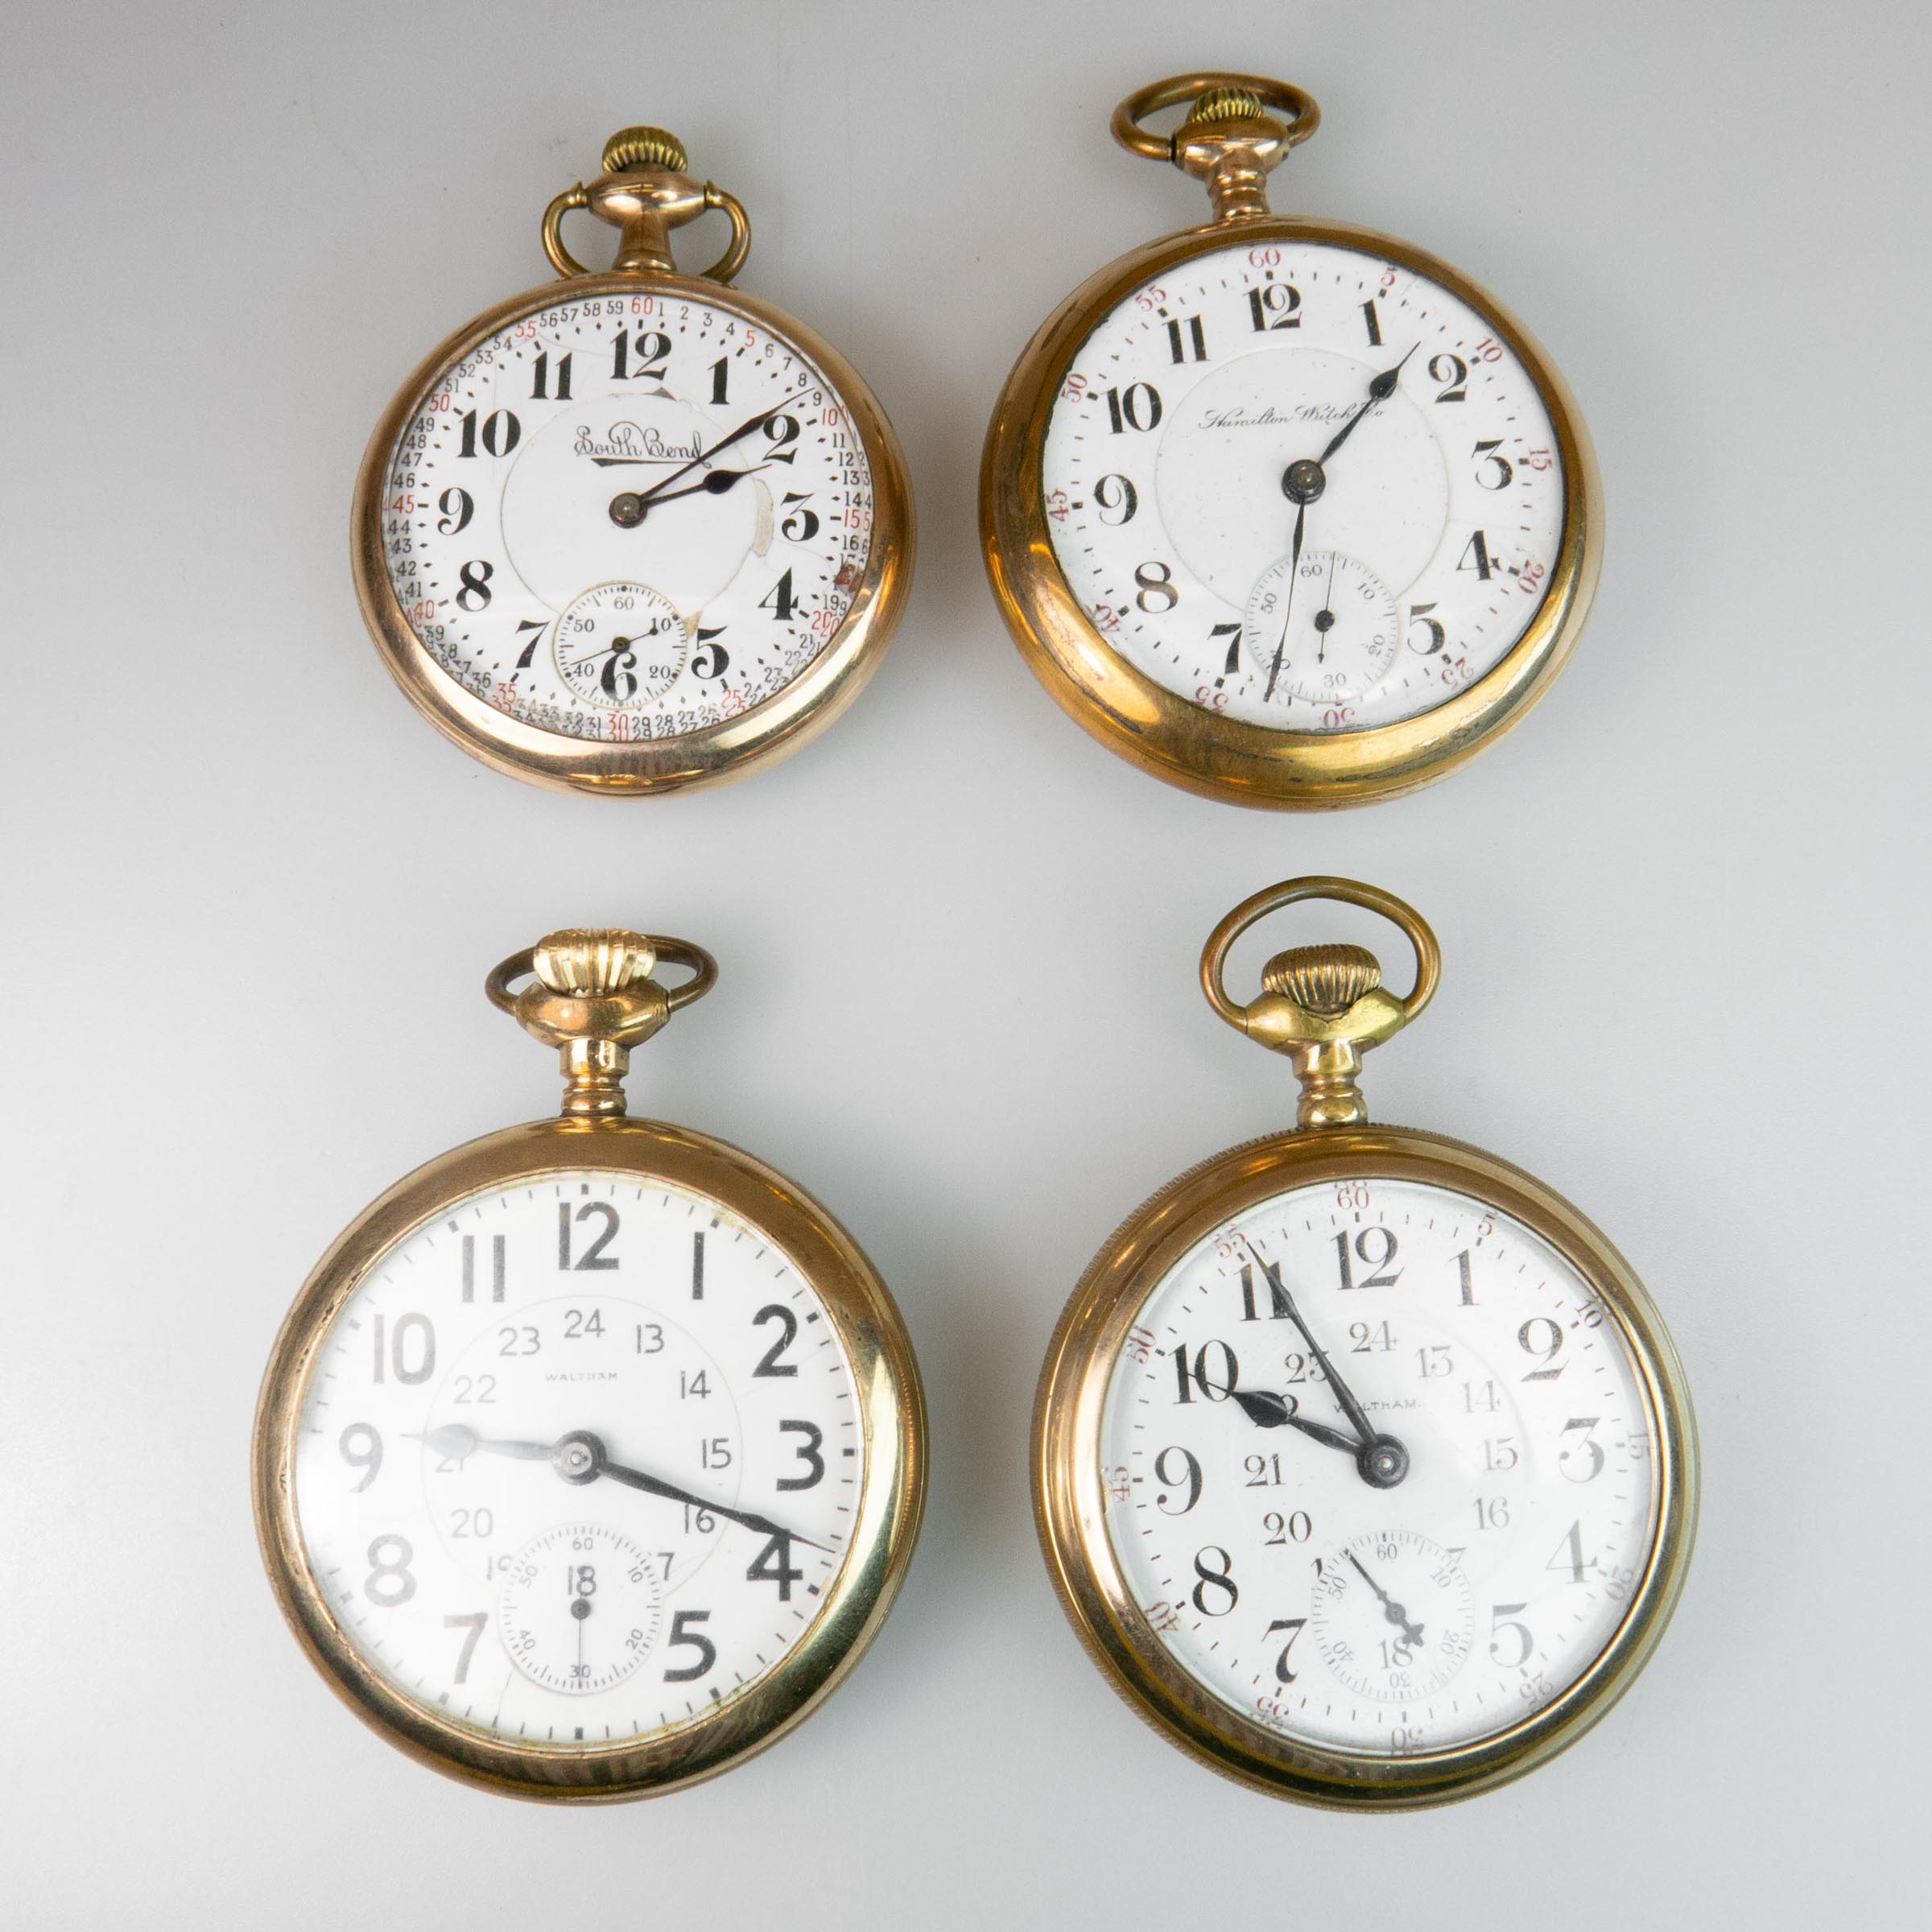 Four American Openface, Stem Wind Pocket Watches In Gold-Filled Cases